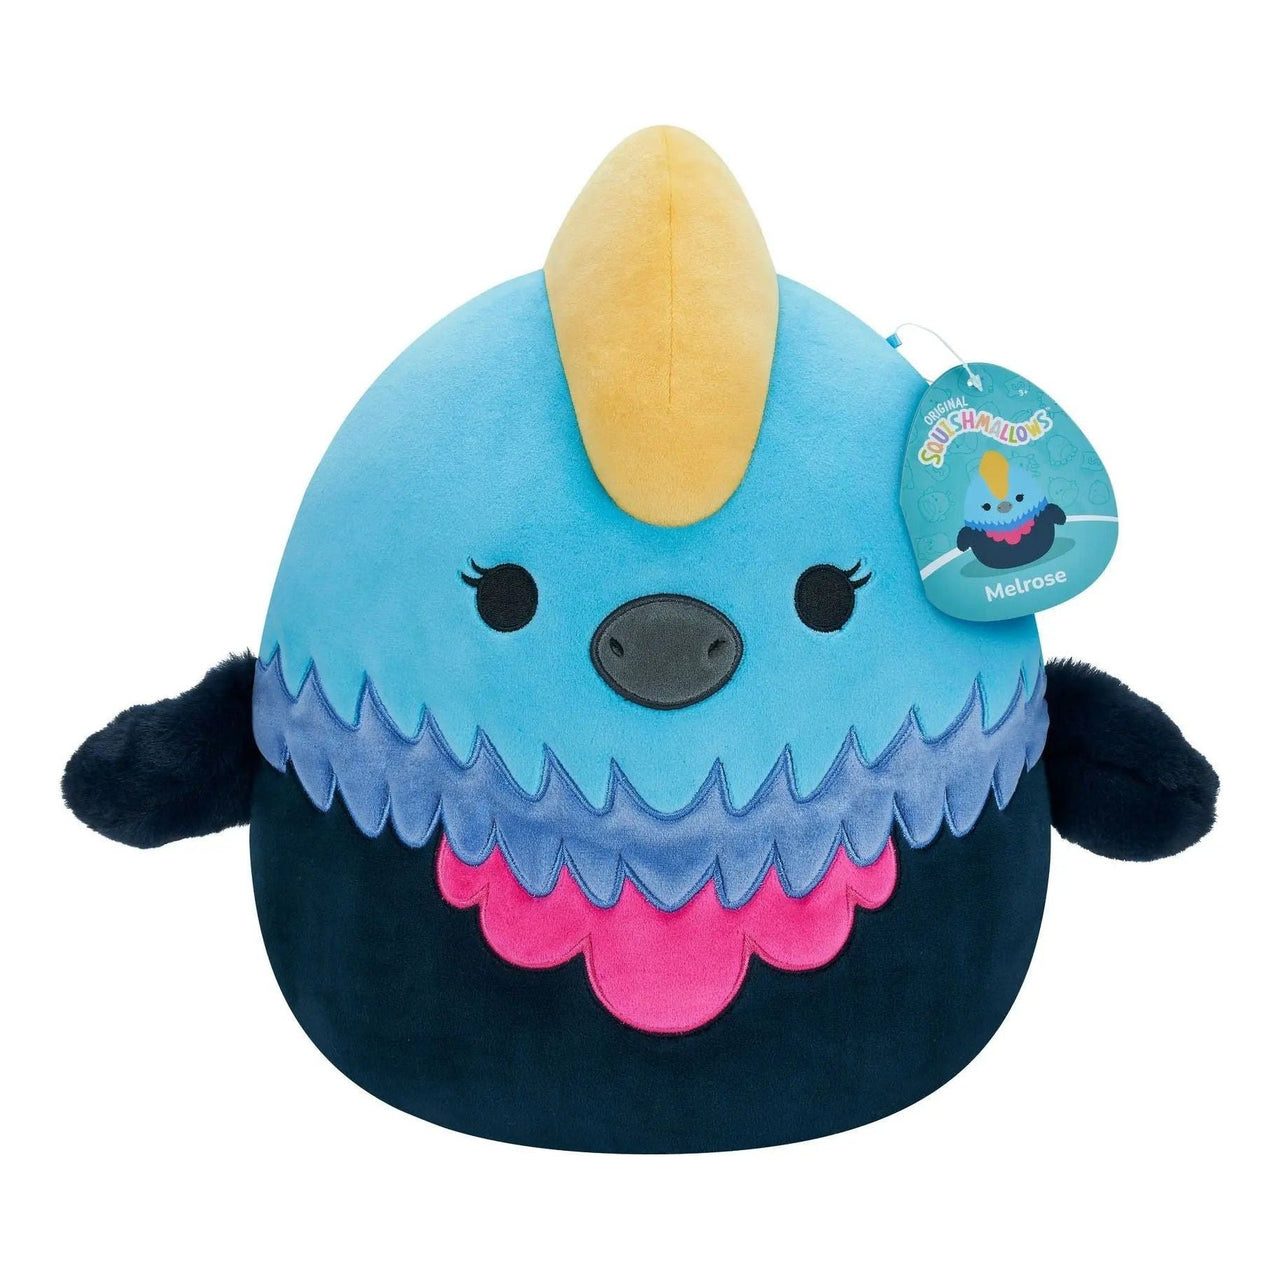 Squishmallows 12" Melrose the Cassowary Plush Squishmallows